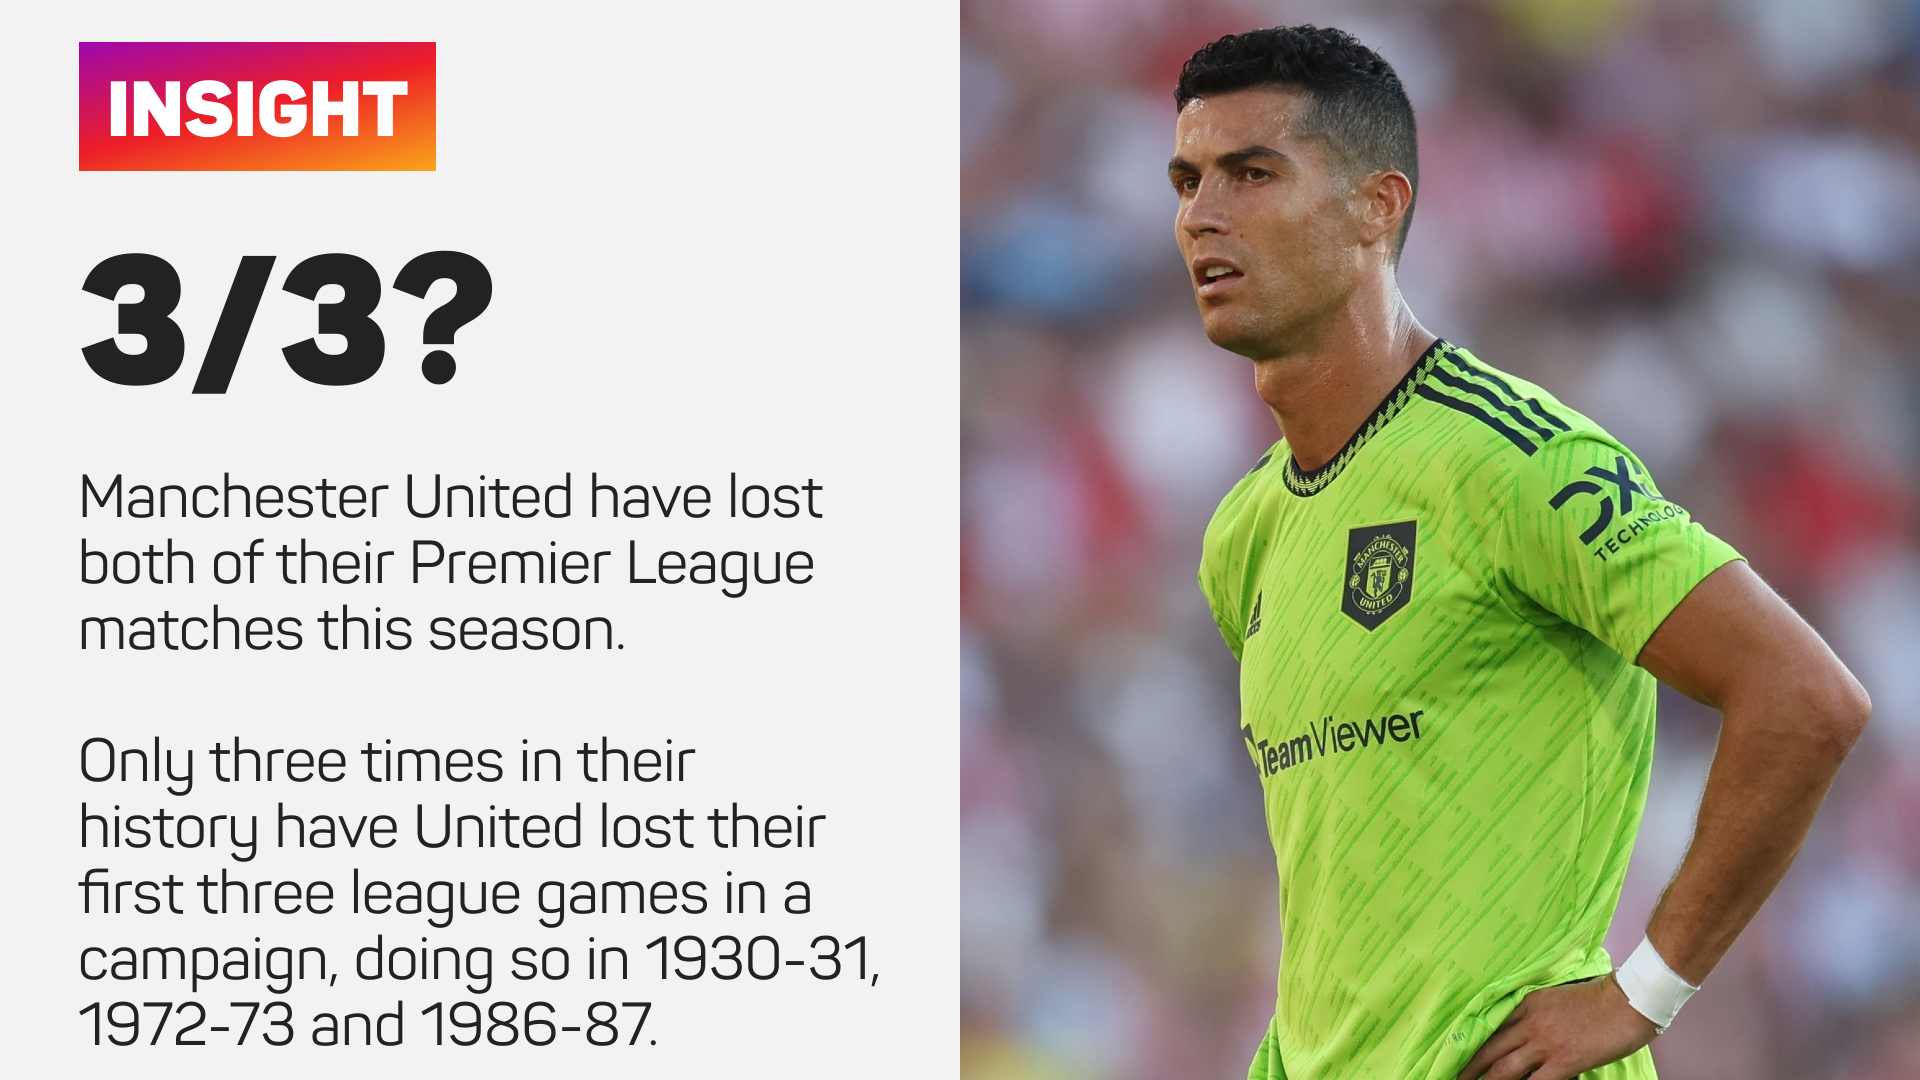 Manchester United have lost their opening two Premier League matches